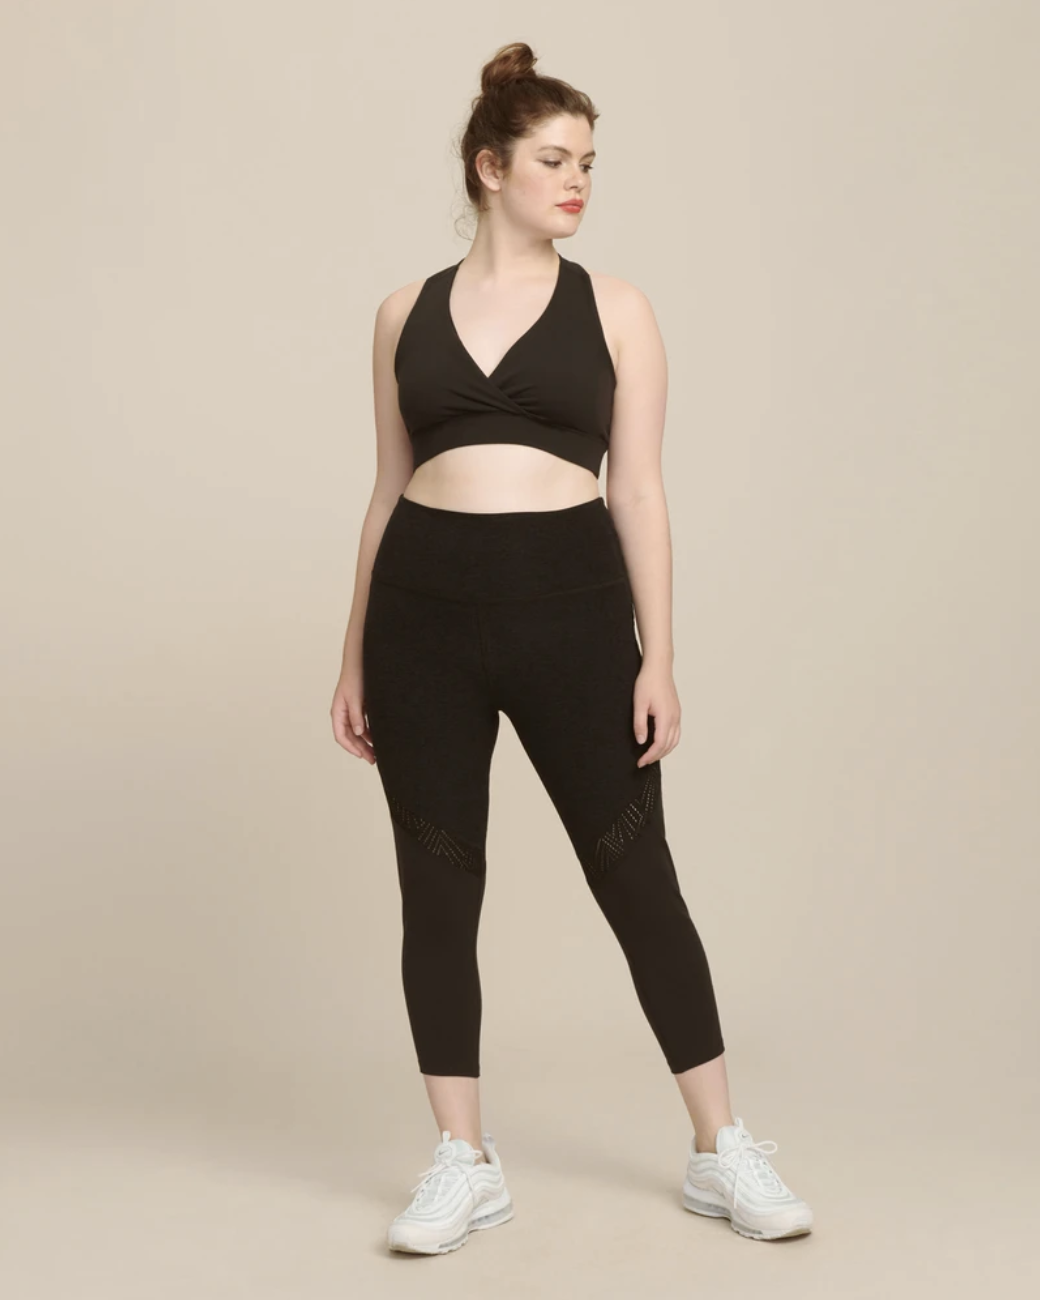 Compressive Leggings with Pockets That Don't Roll Down  Affordable leggings,  Squat proof leggings, Stretchy leggings